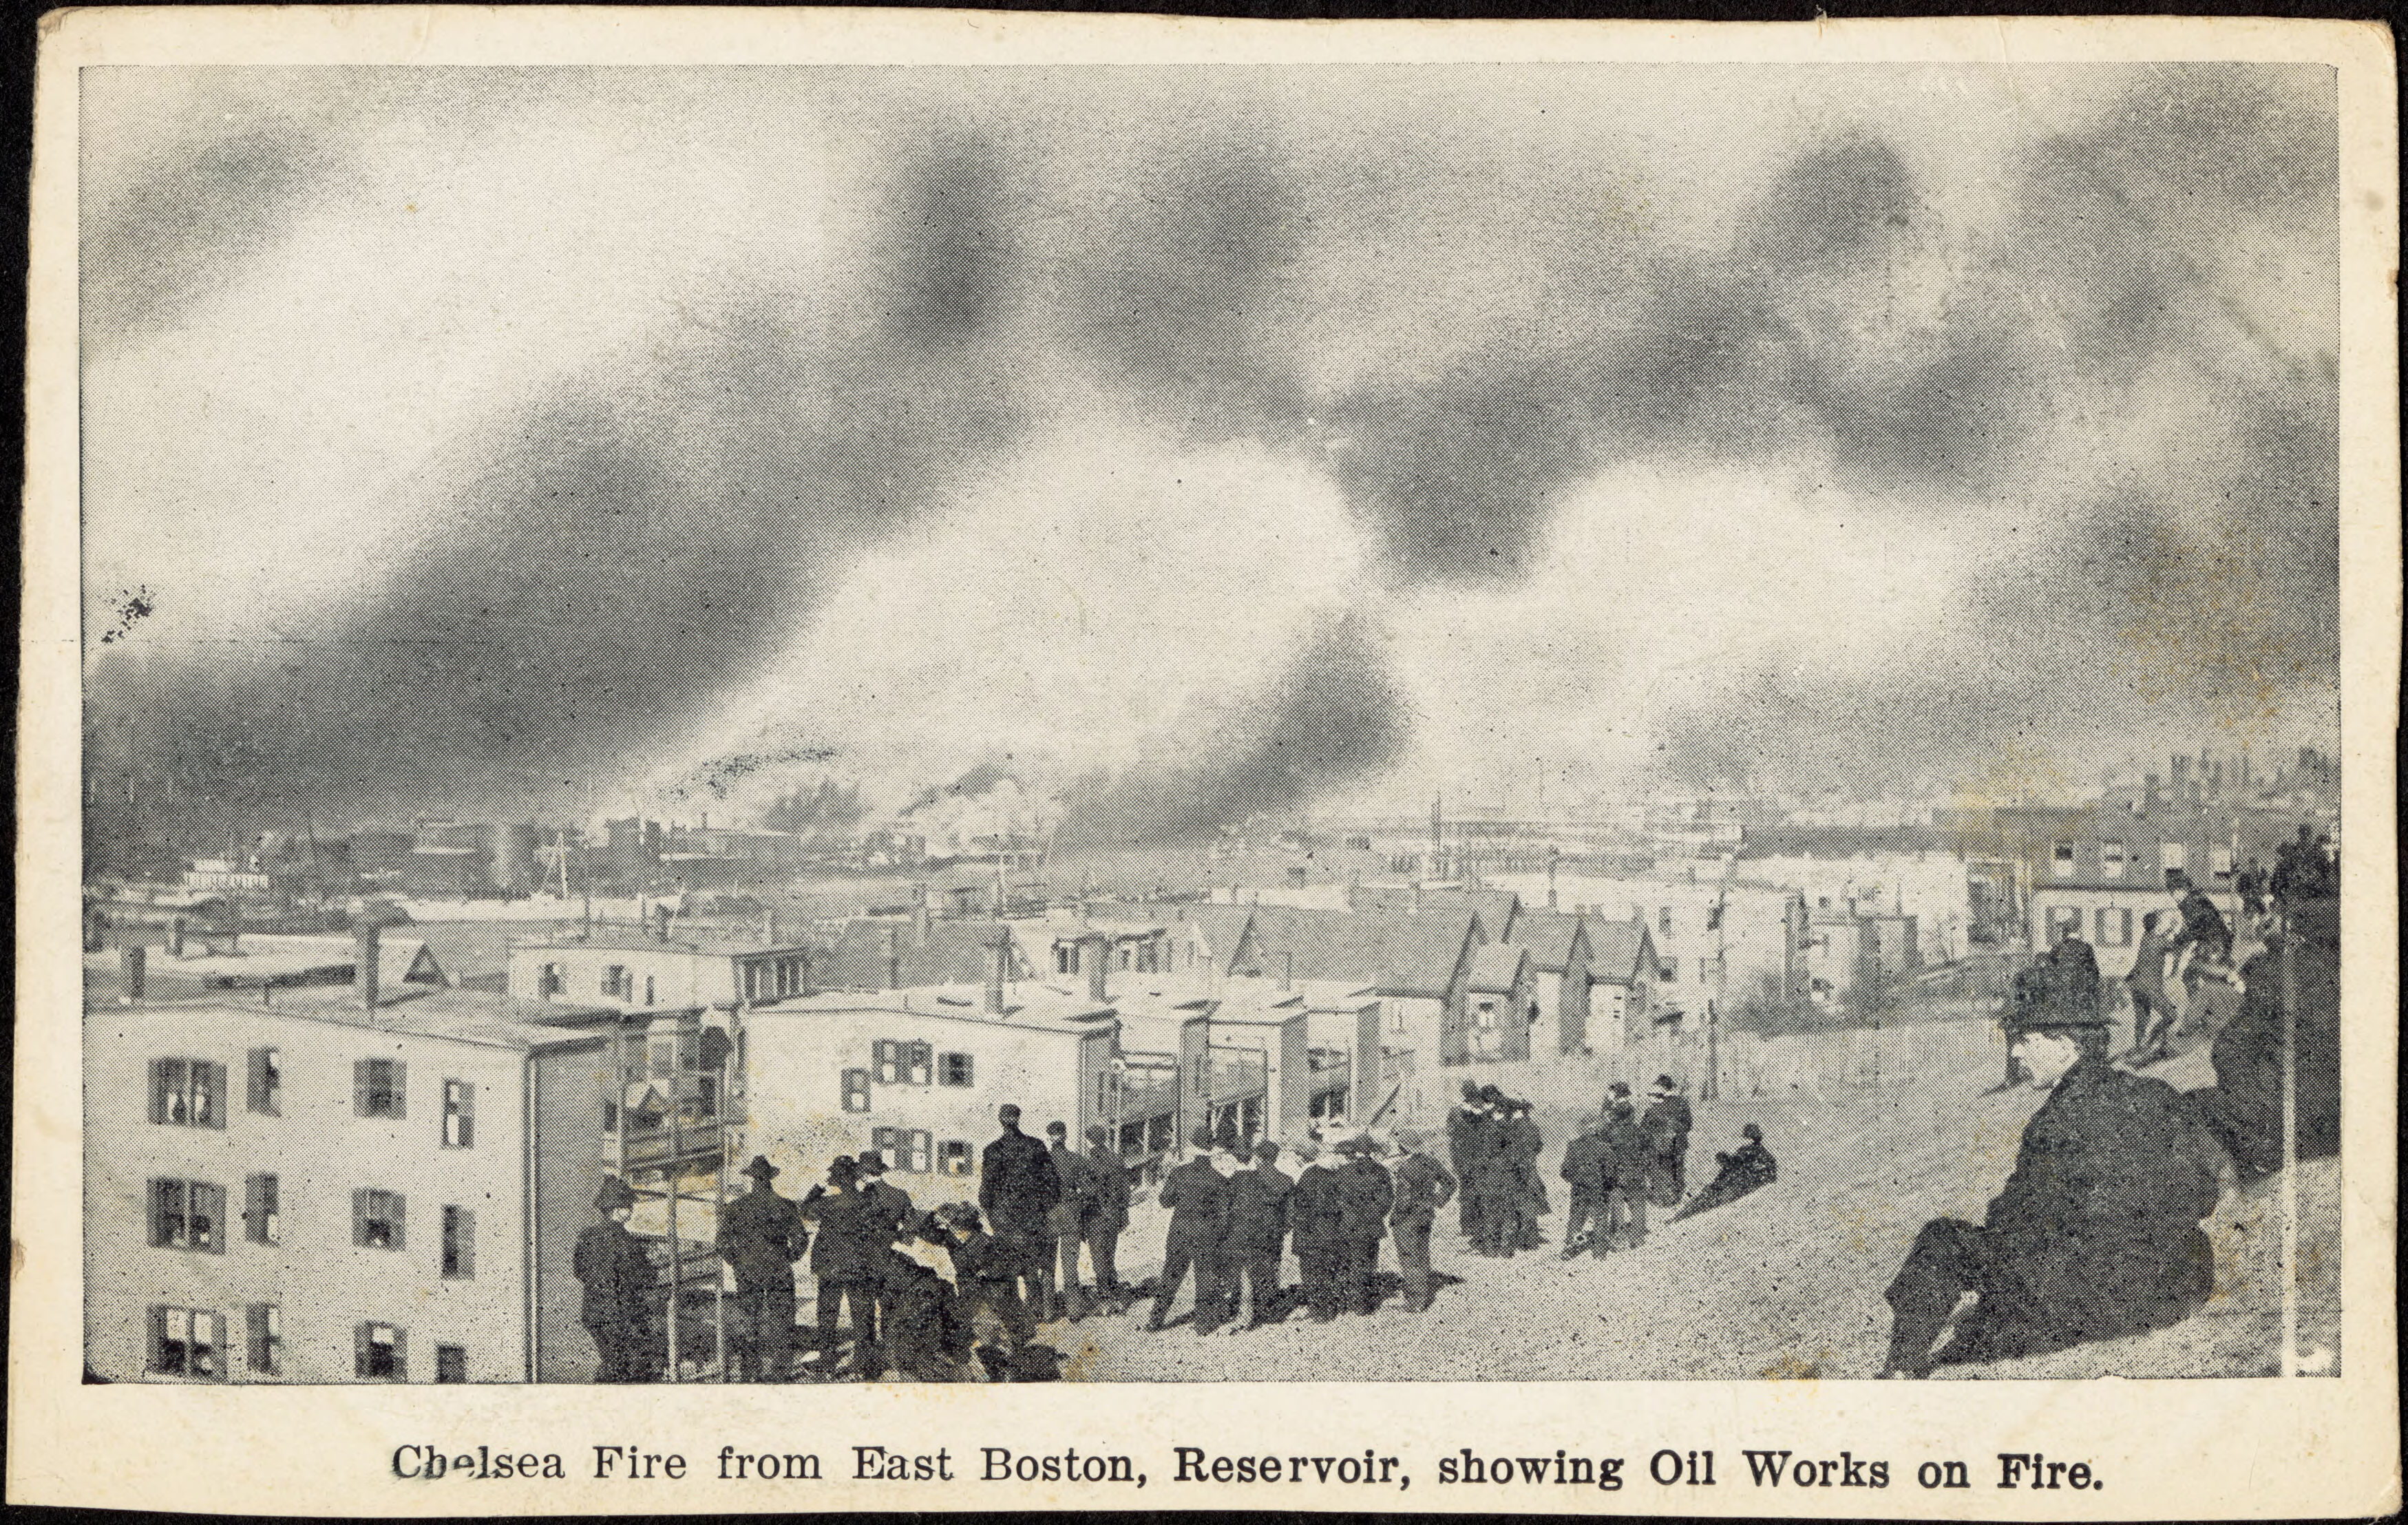 In April 1908, Chelsea was devastated by an enormous fire that tore through the city, including the oil tanks along the Mystic River, as seen in this postcard from the Chelsea Public Library’s collections. The air pollution from this event was one of the worst toxic disasters in Massachusetts history.